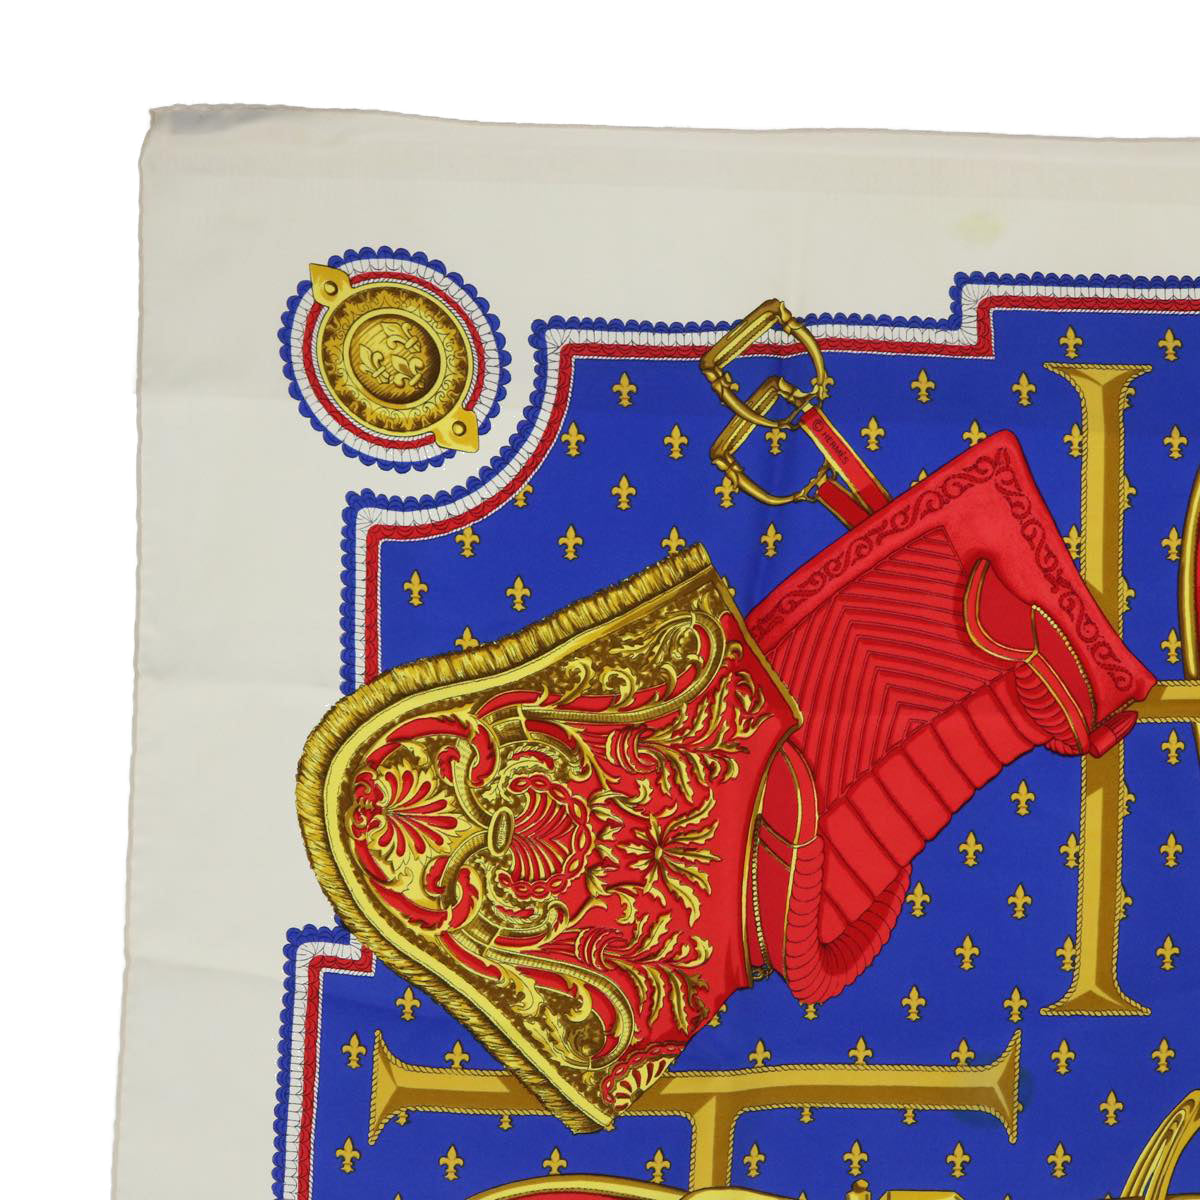 HERMES Carre 90 SELLES A HOUSSE Scarf Silk White Red blue Auth 54052